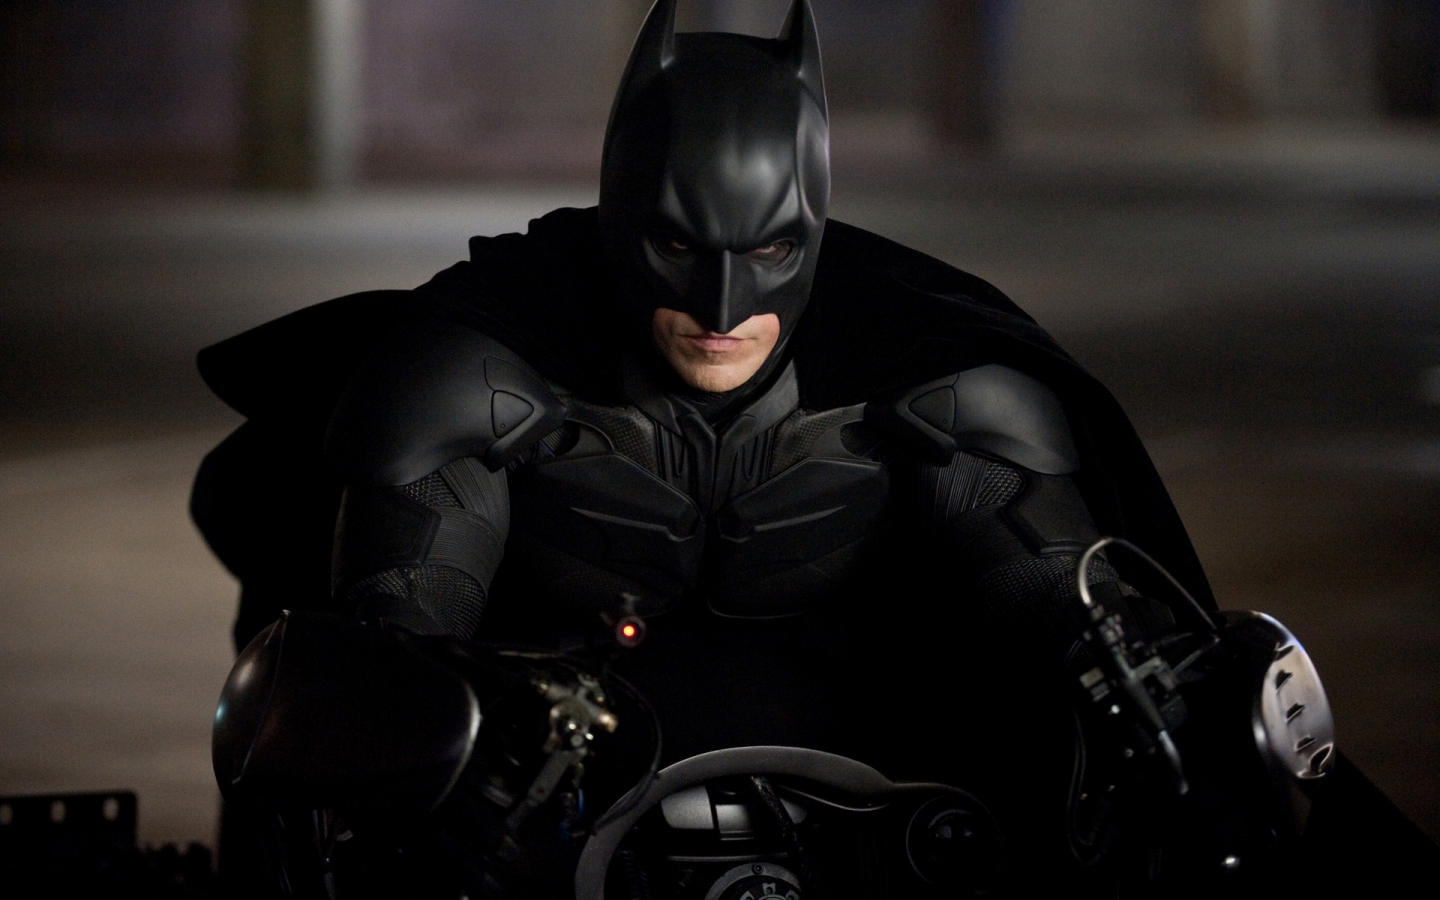 Angry Batman for 1440 x 900 widescreen resolution